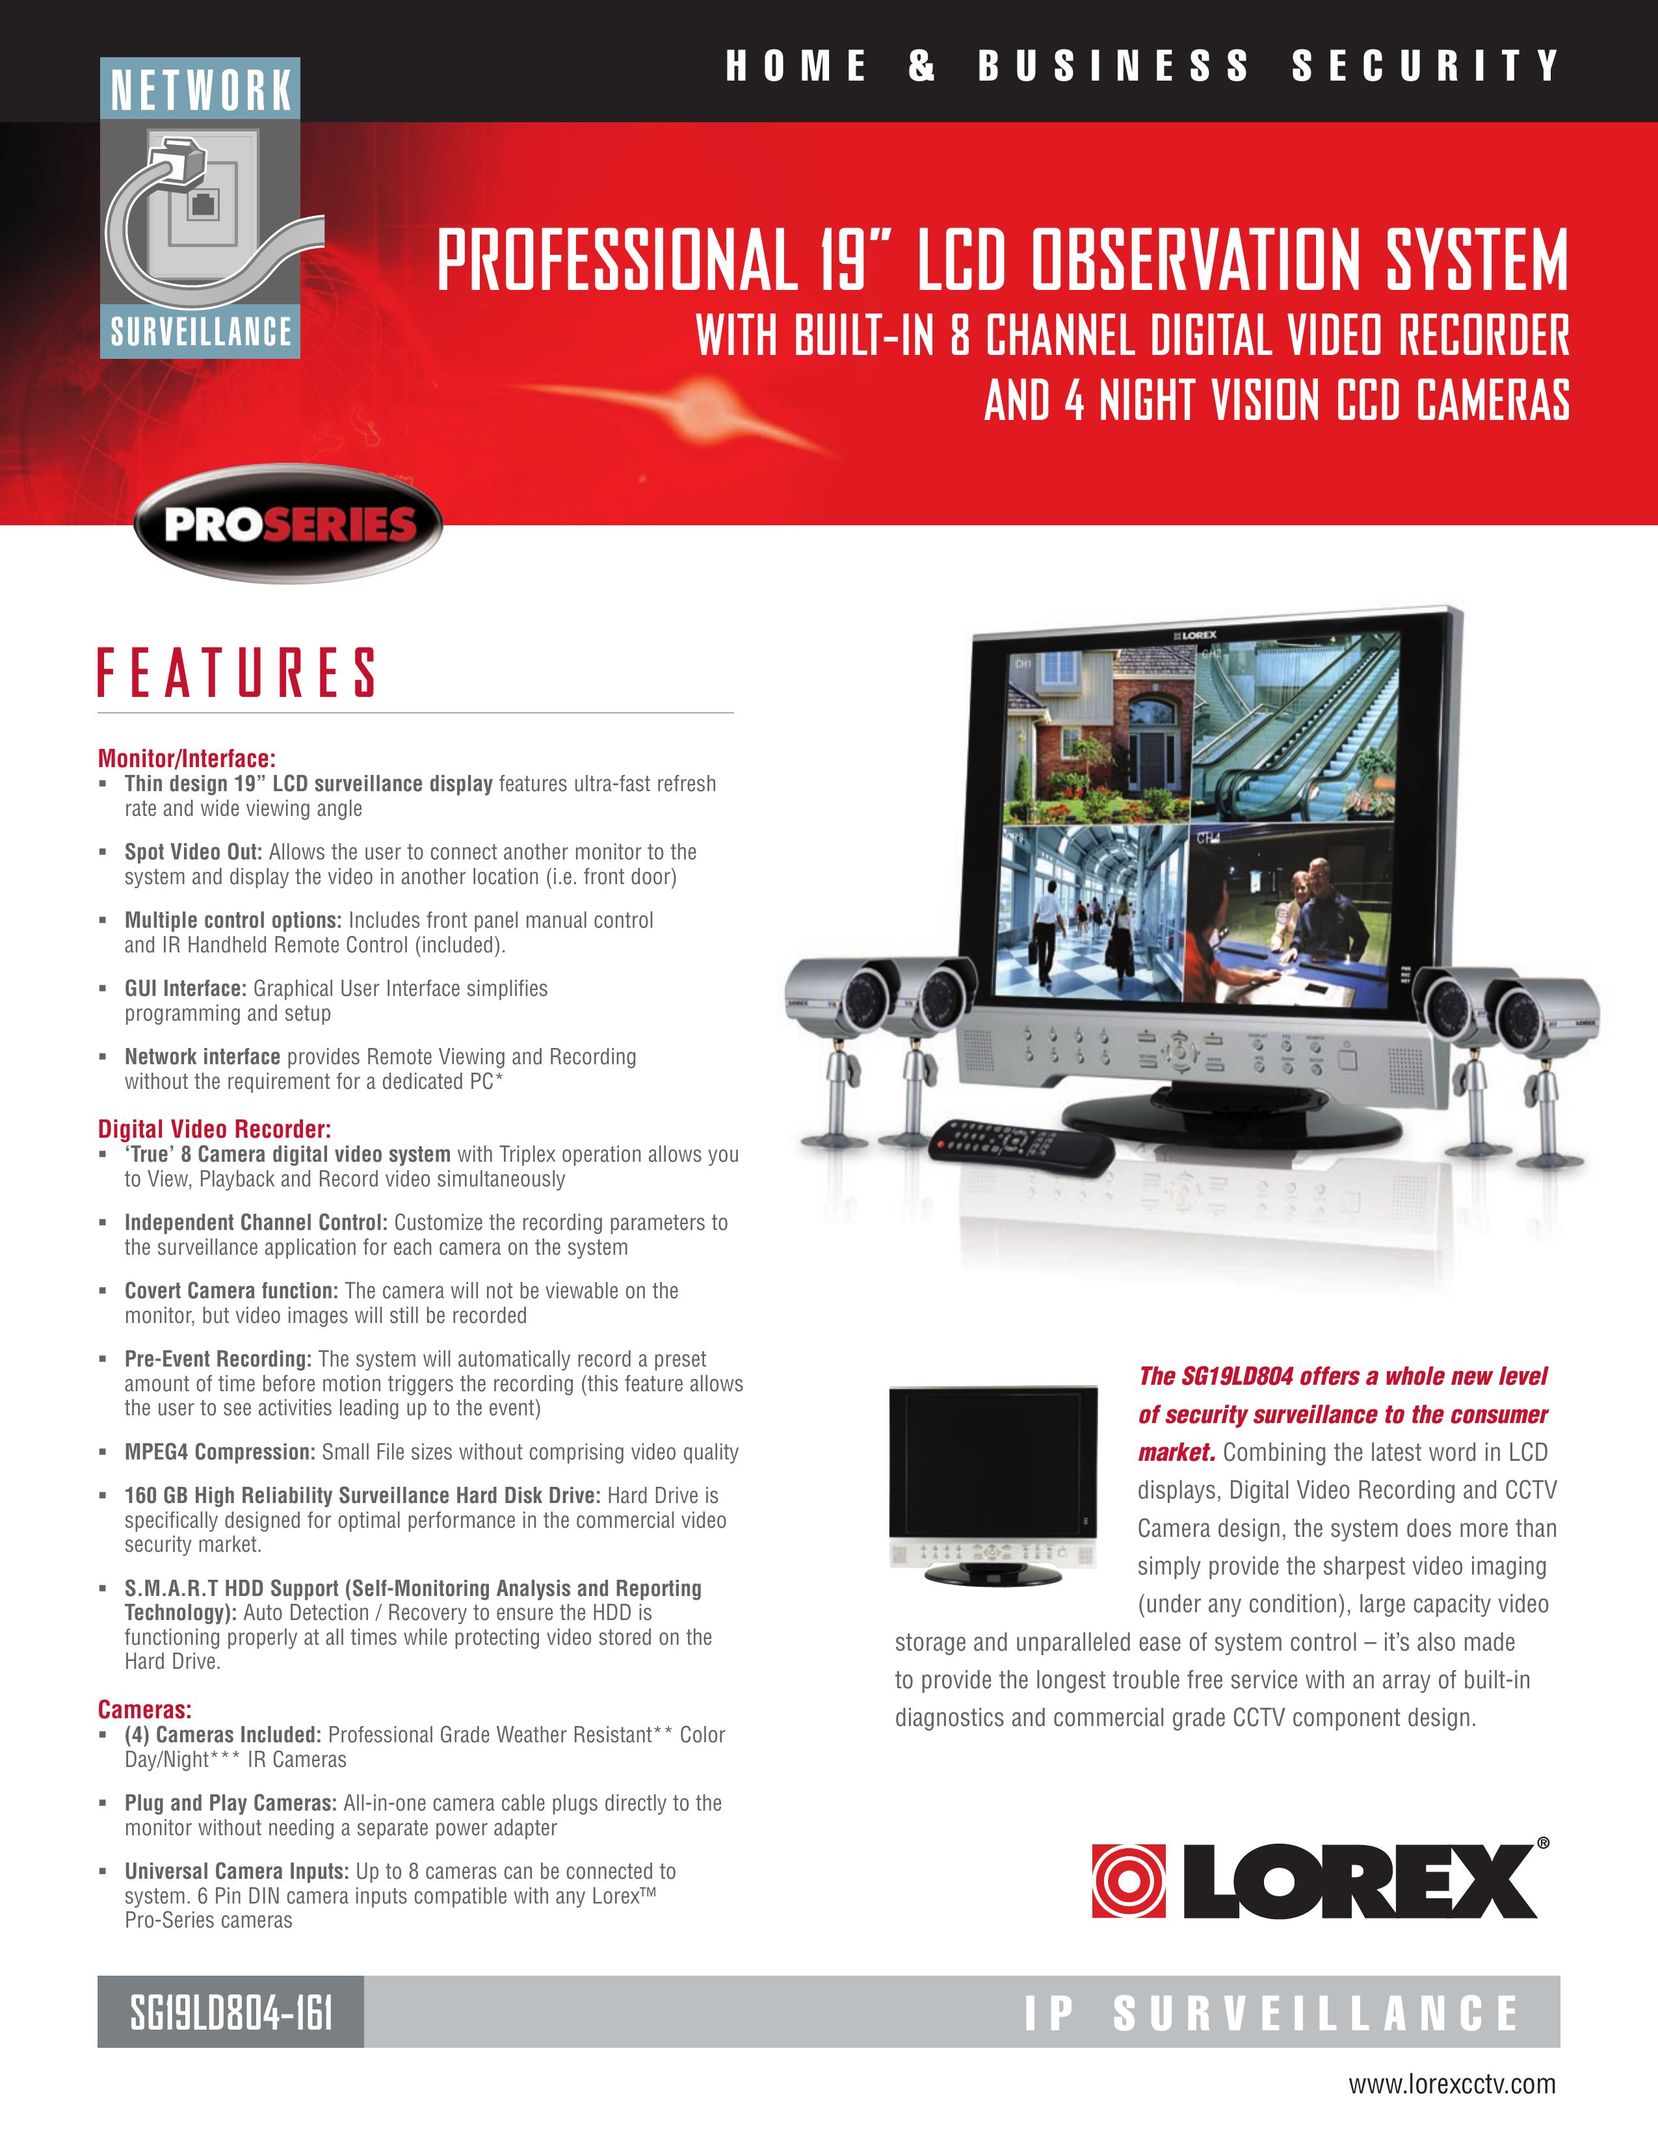 LOREX Technology SG 19LD804-161 Home Security System User Manual